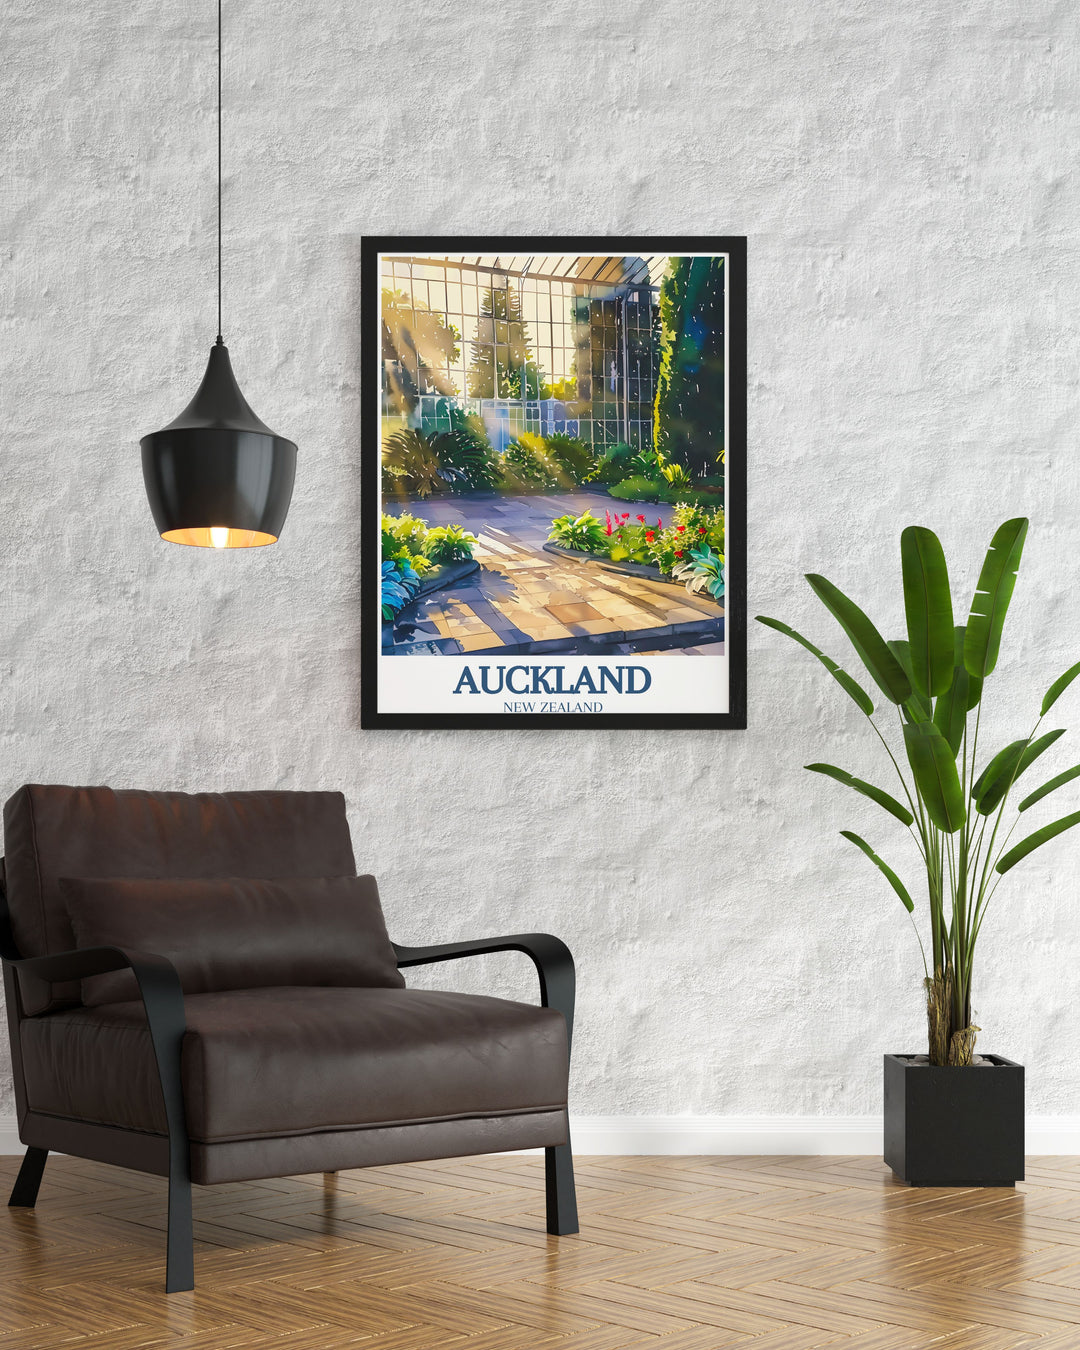 Auckland wall art featuring the stunning Auckland Domain, designed to bring a sense of natural beauty and historical charm to your home decor.